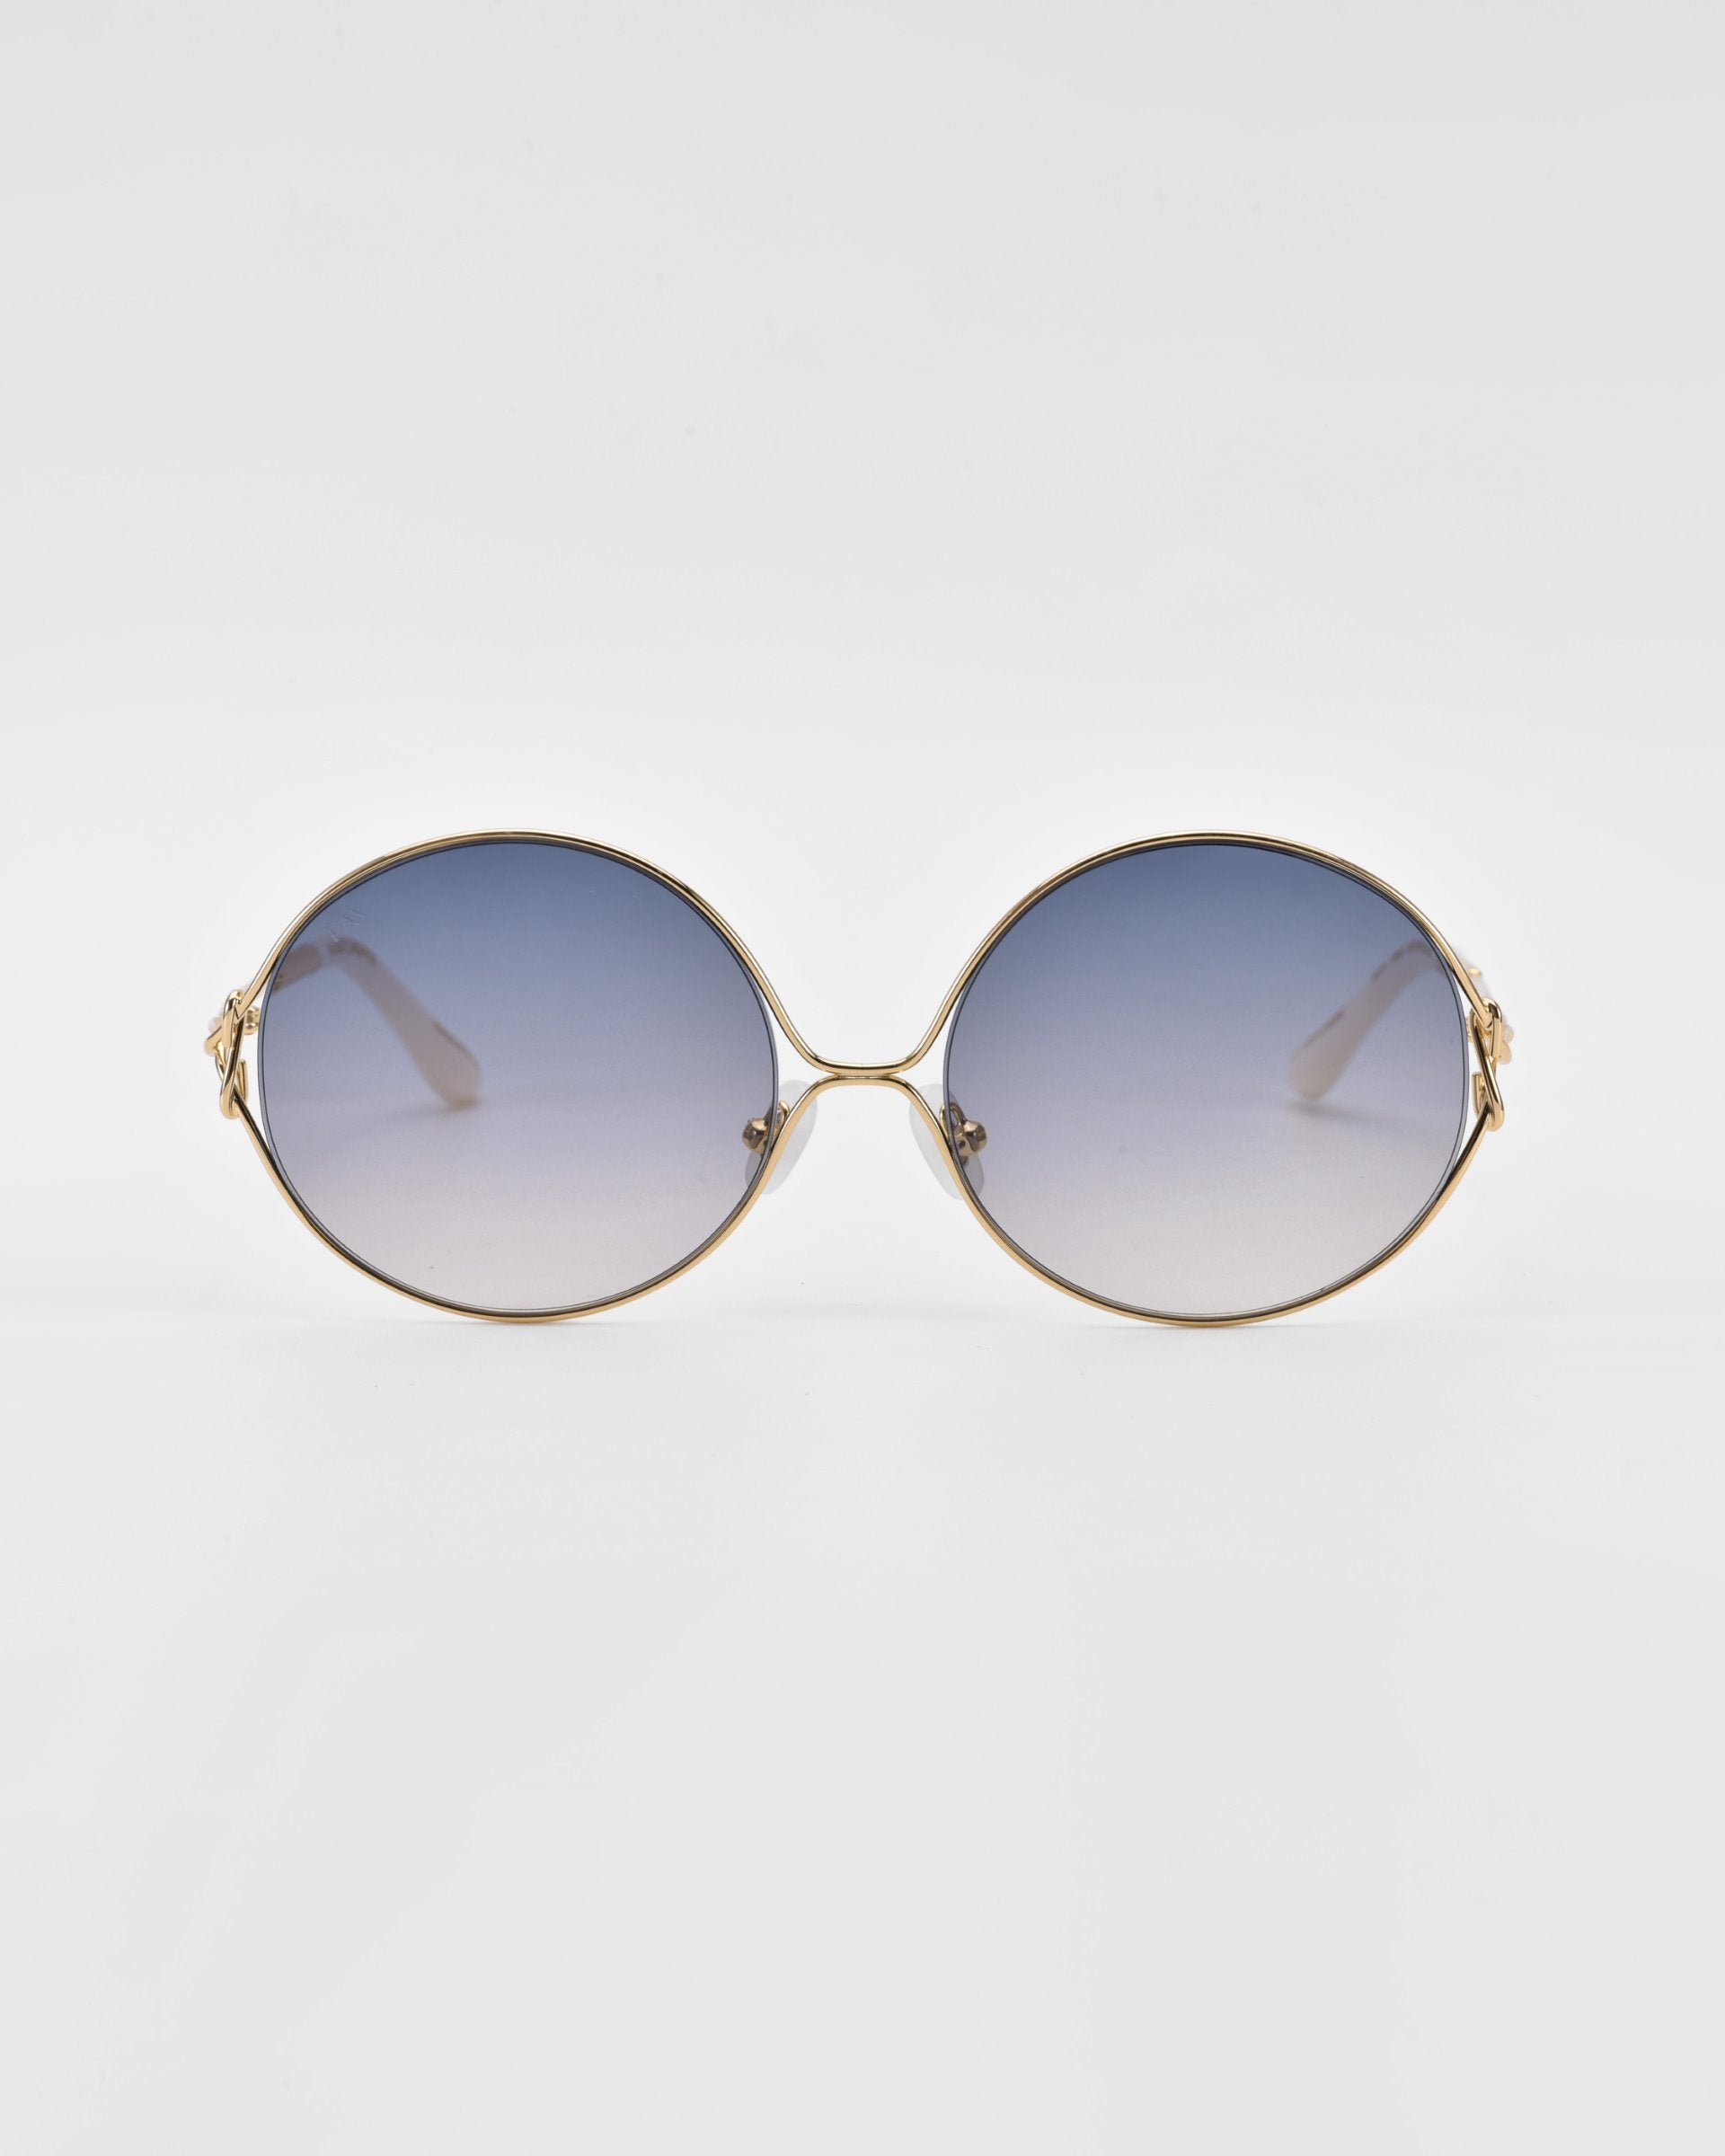 A pair of stylish retro-inspired sunglasses featuring oversized round frames and gradient tinted lenses. The lenses transition from dark blue at the top to a lighter shade towards the bottom. The backdrop is minimal and white. The product name is Aura and it is by For Art's Sake®.